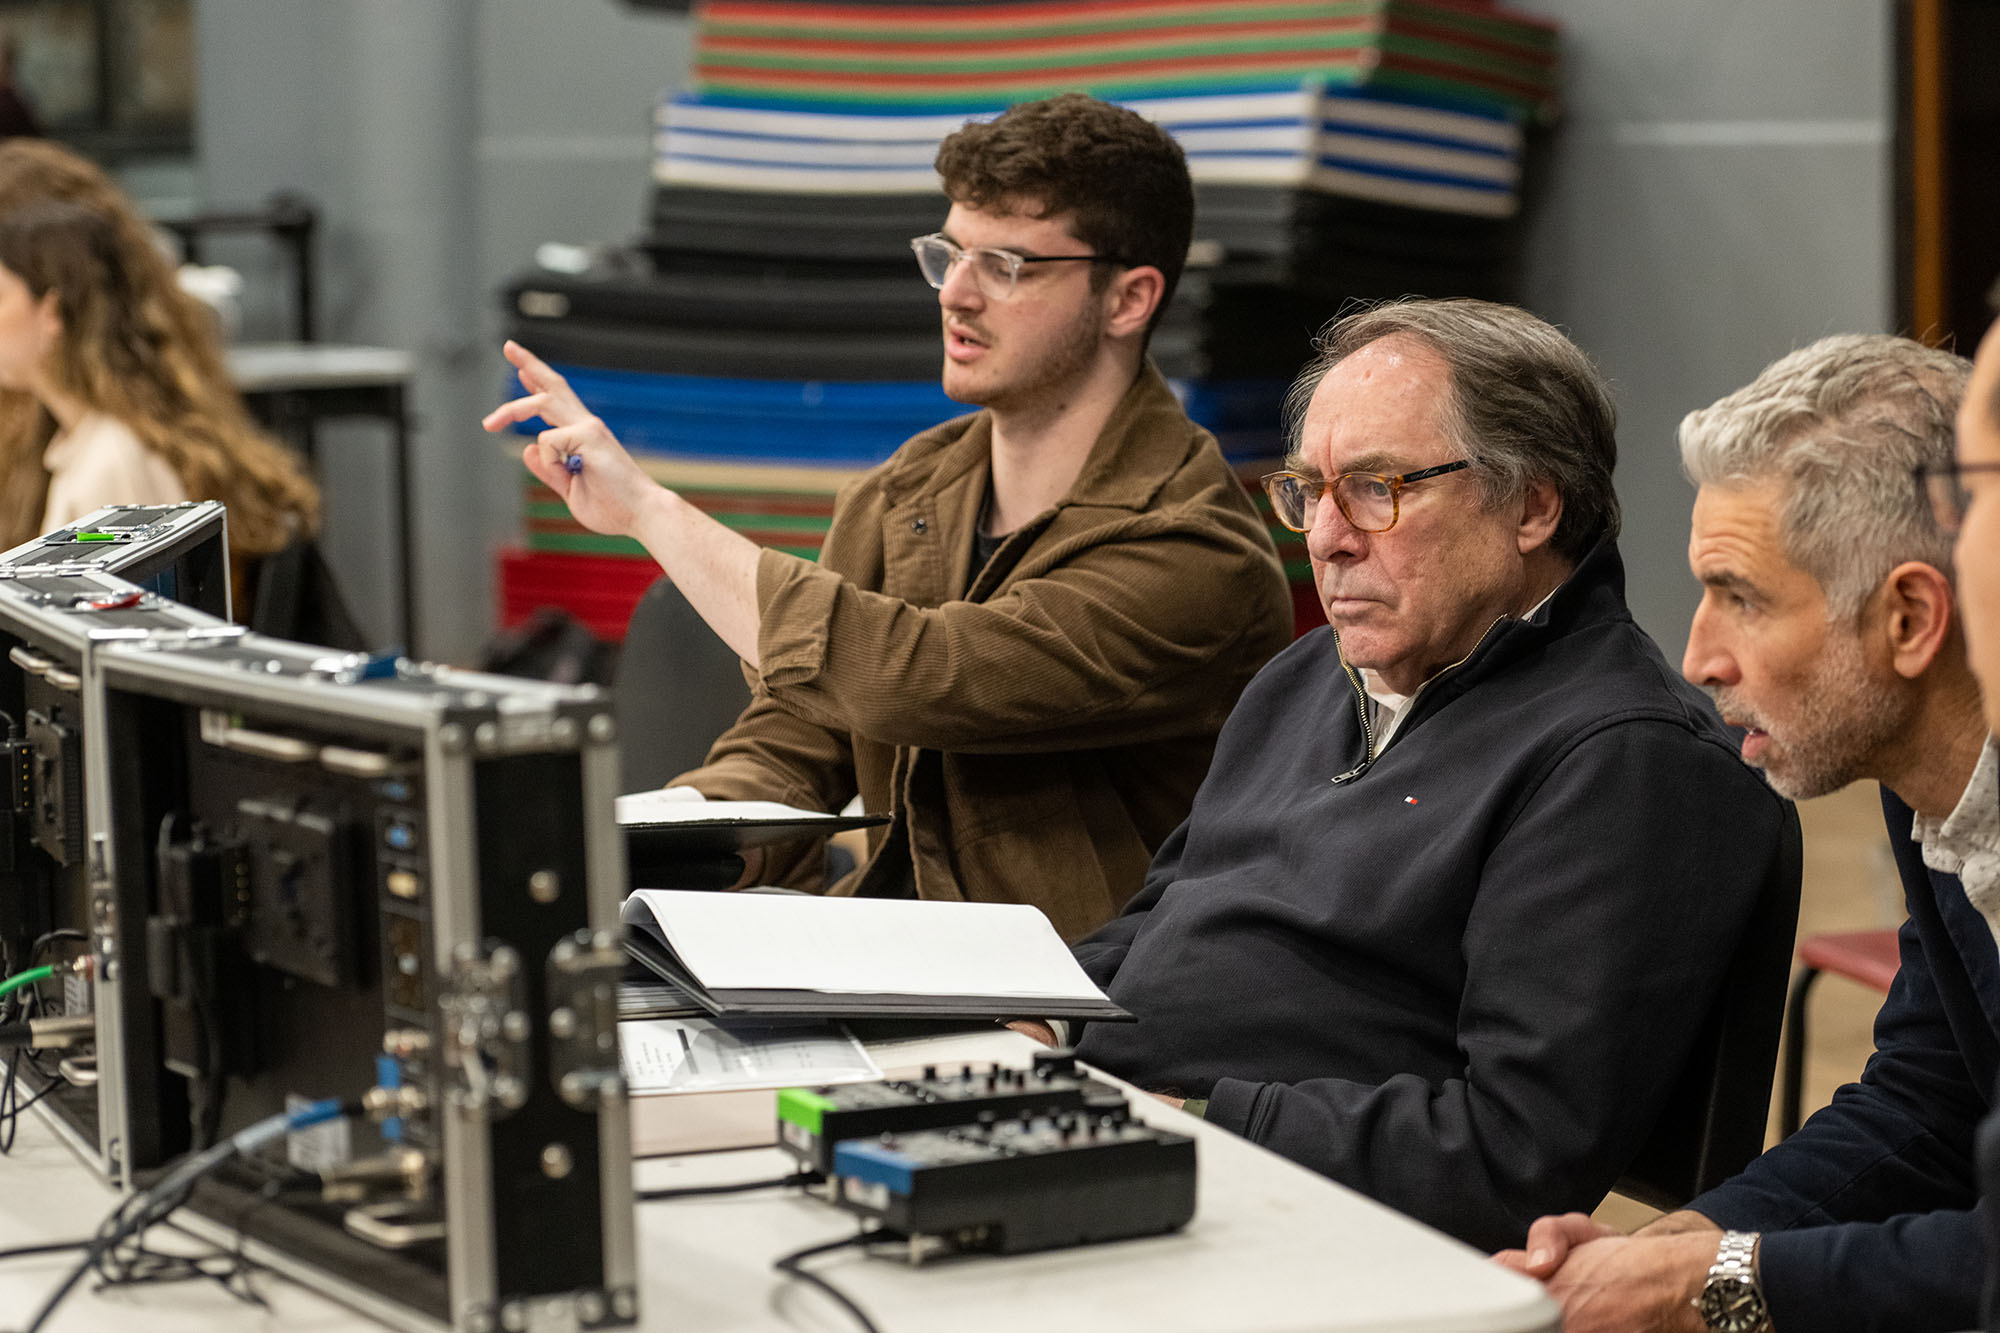 Photo: From left, director Eli Canter (COM’23), Paul Schneider, COM professor of film and television and department chair,  and Tim Palmer, a COM professor of the practice in cinematography, discuss camera blocking during a rehearsal. A young man wearing glasses and a brown collared shirt points forward and speaks as an older man wearing glasses and a black collared shirt sits to his right. They both sit at a table with multiple mini screens in front of them.